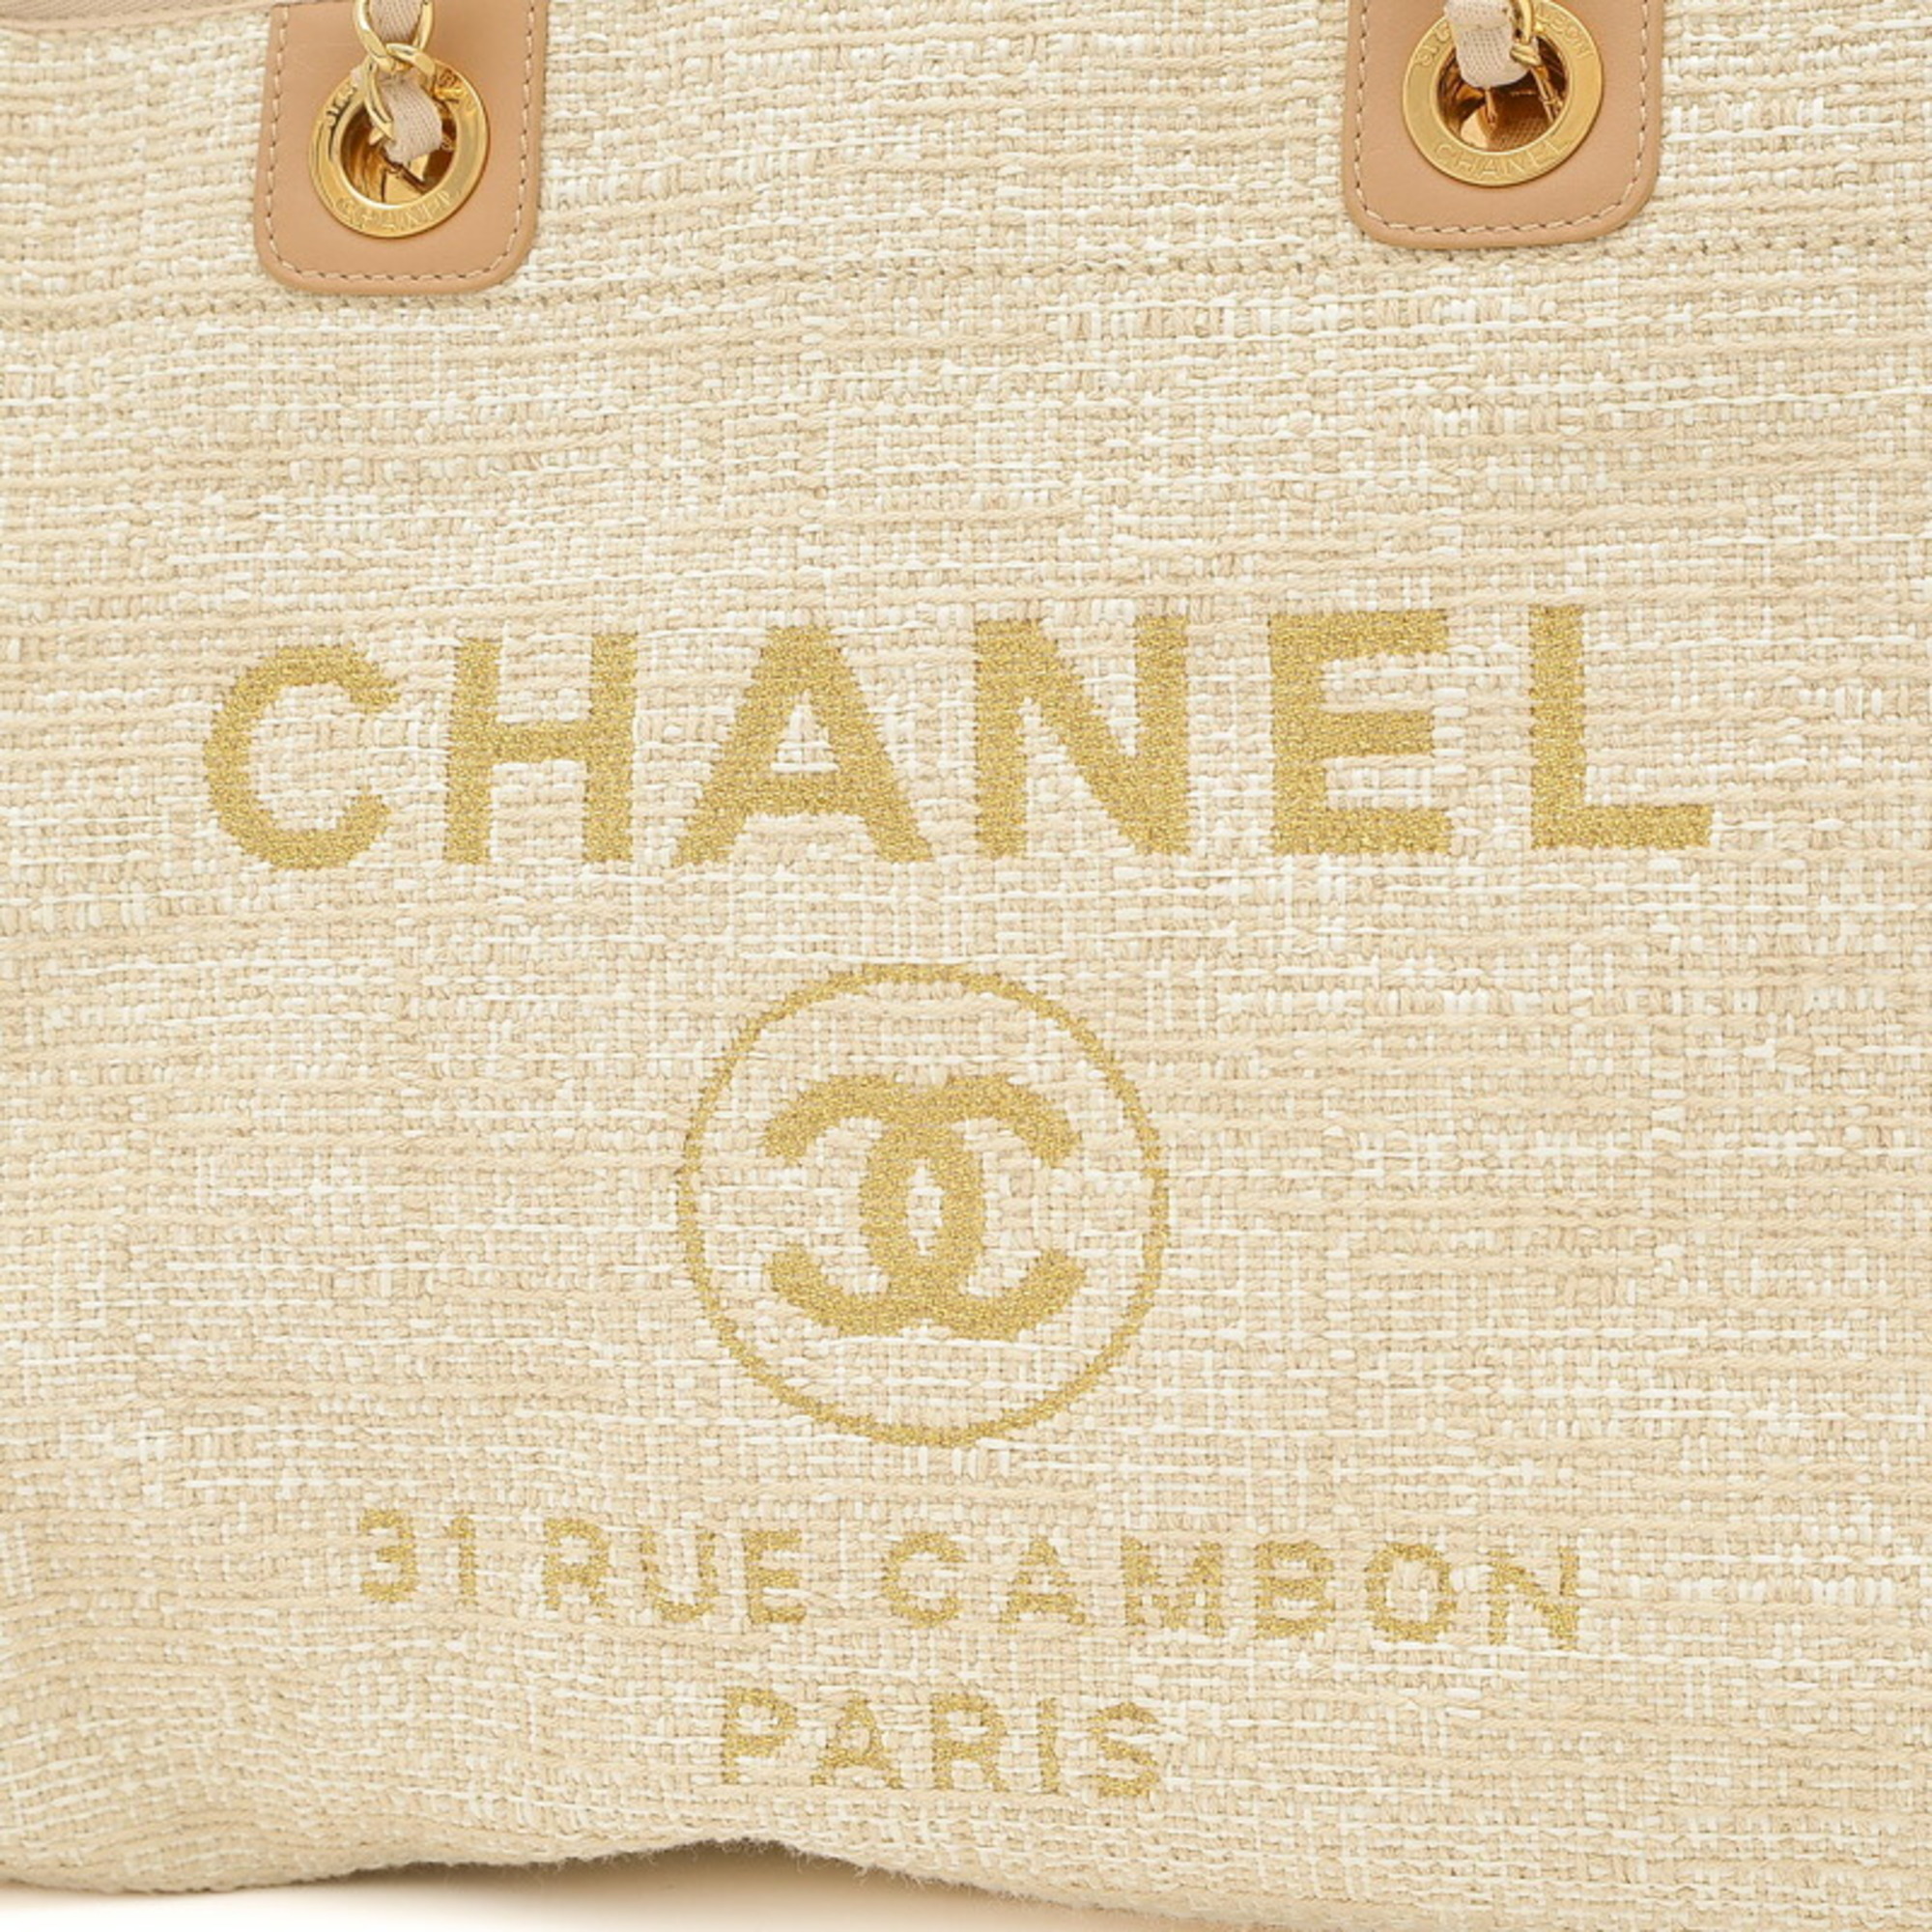 Chanel Deauville MM Medium Chain Tote Bag Canvas Beige Gold A67001